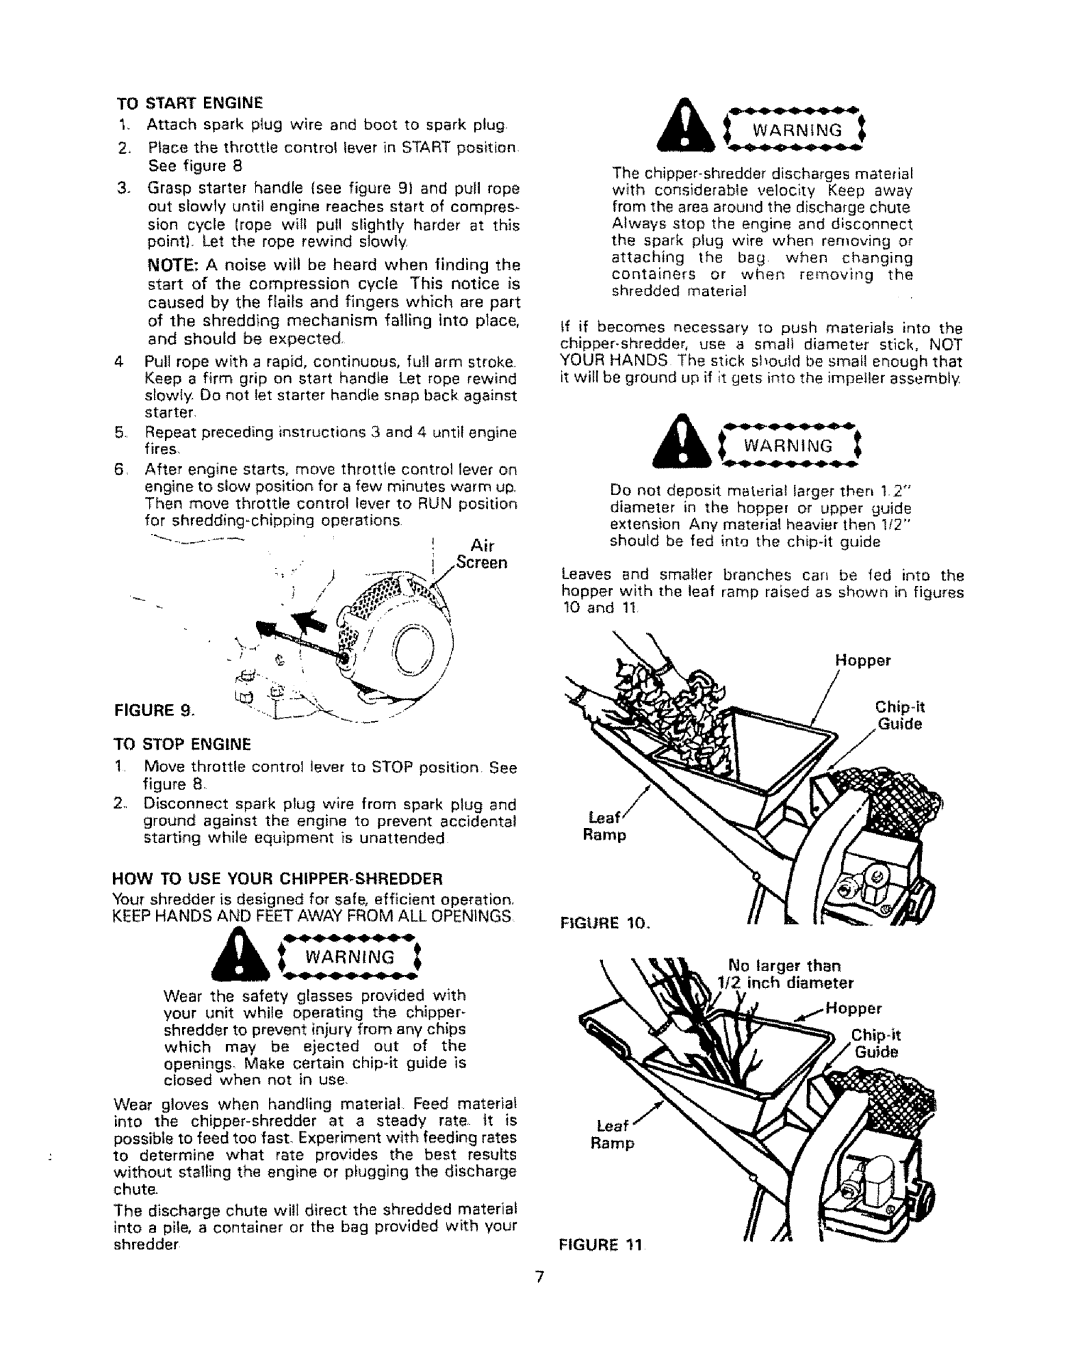 Craftsman 79689, 770-5875B manual i wARN,I G, How To Use Your Chipper-Shredder, No larger than 112 inch diameter, Screen 